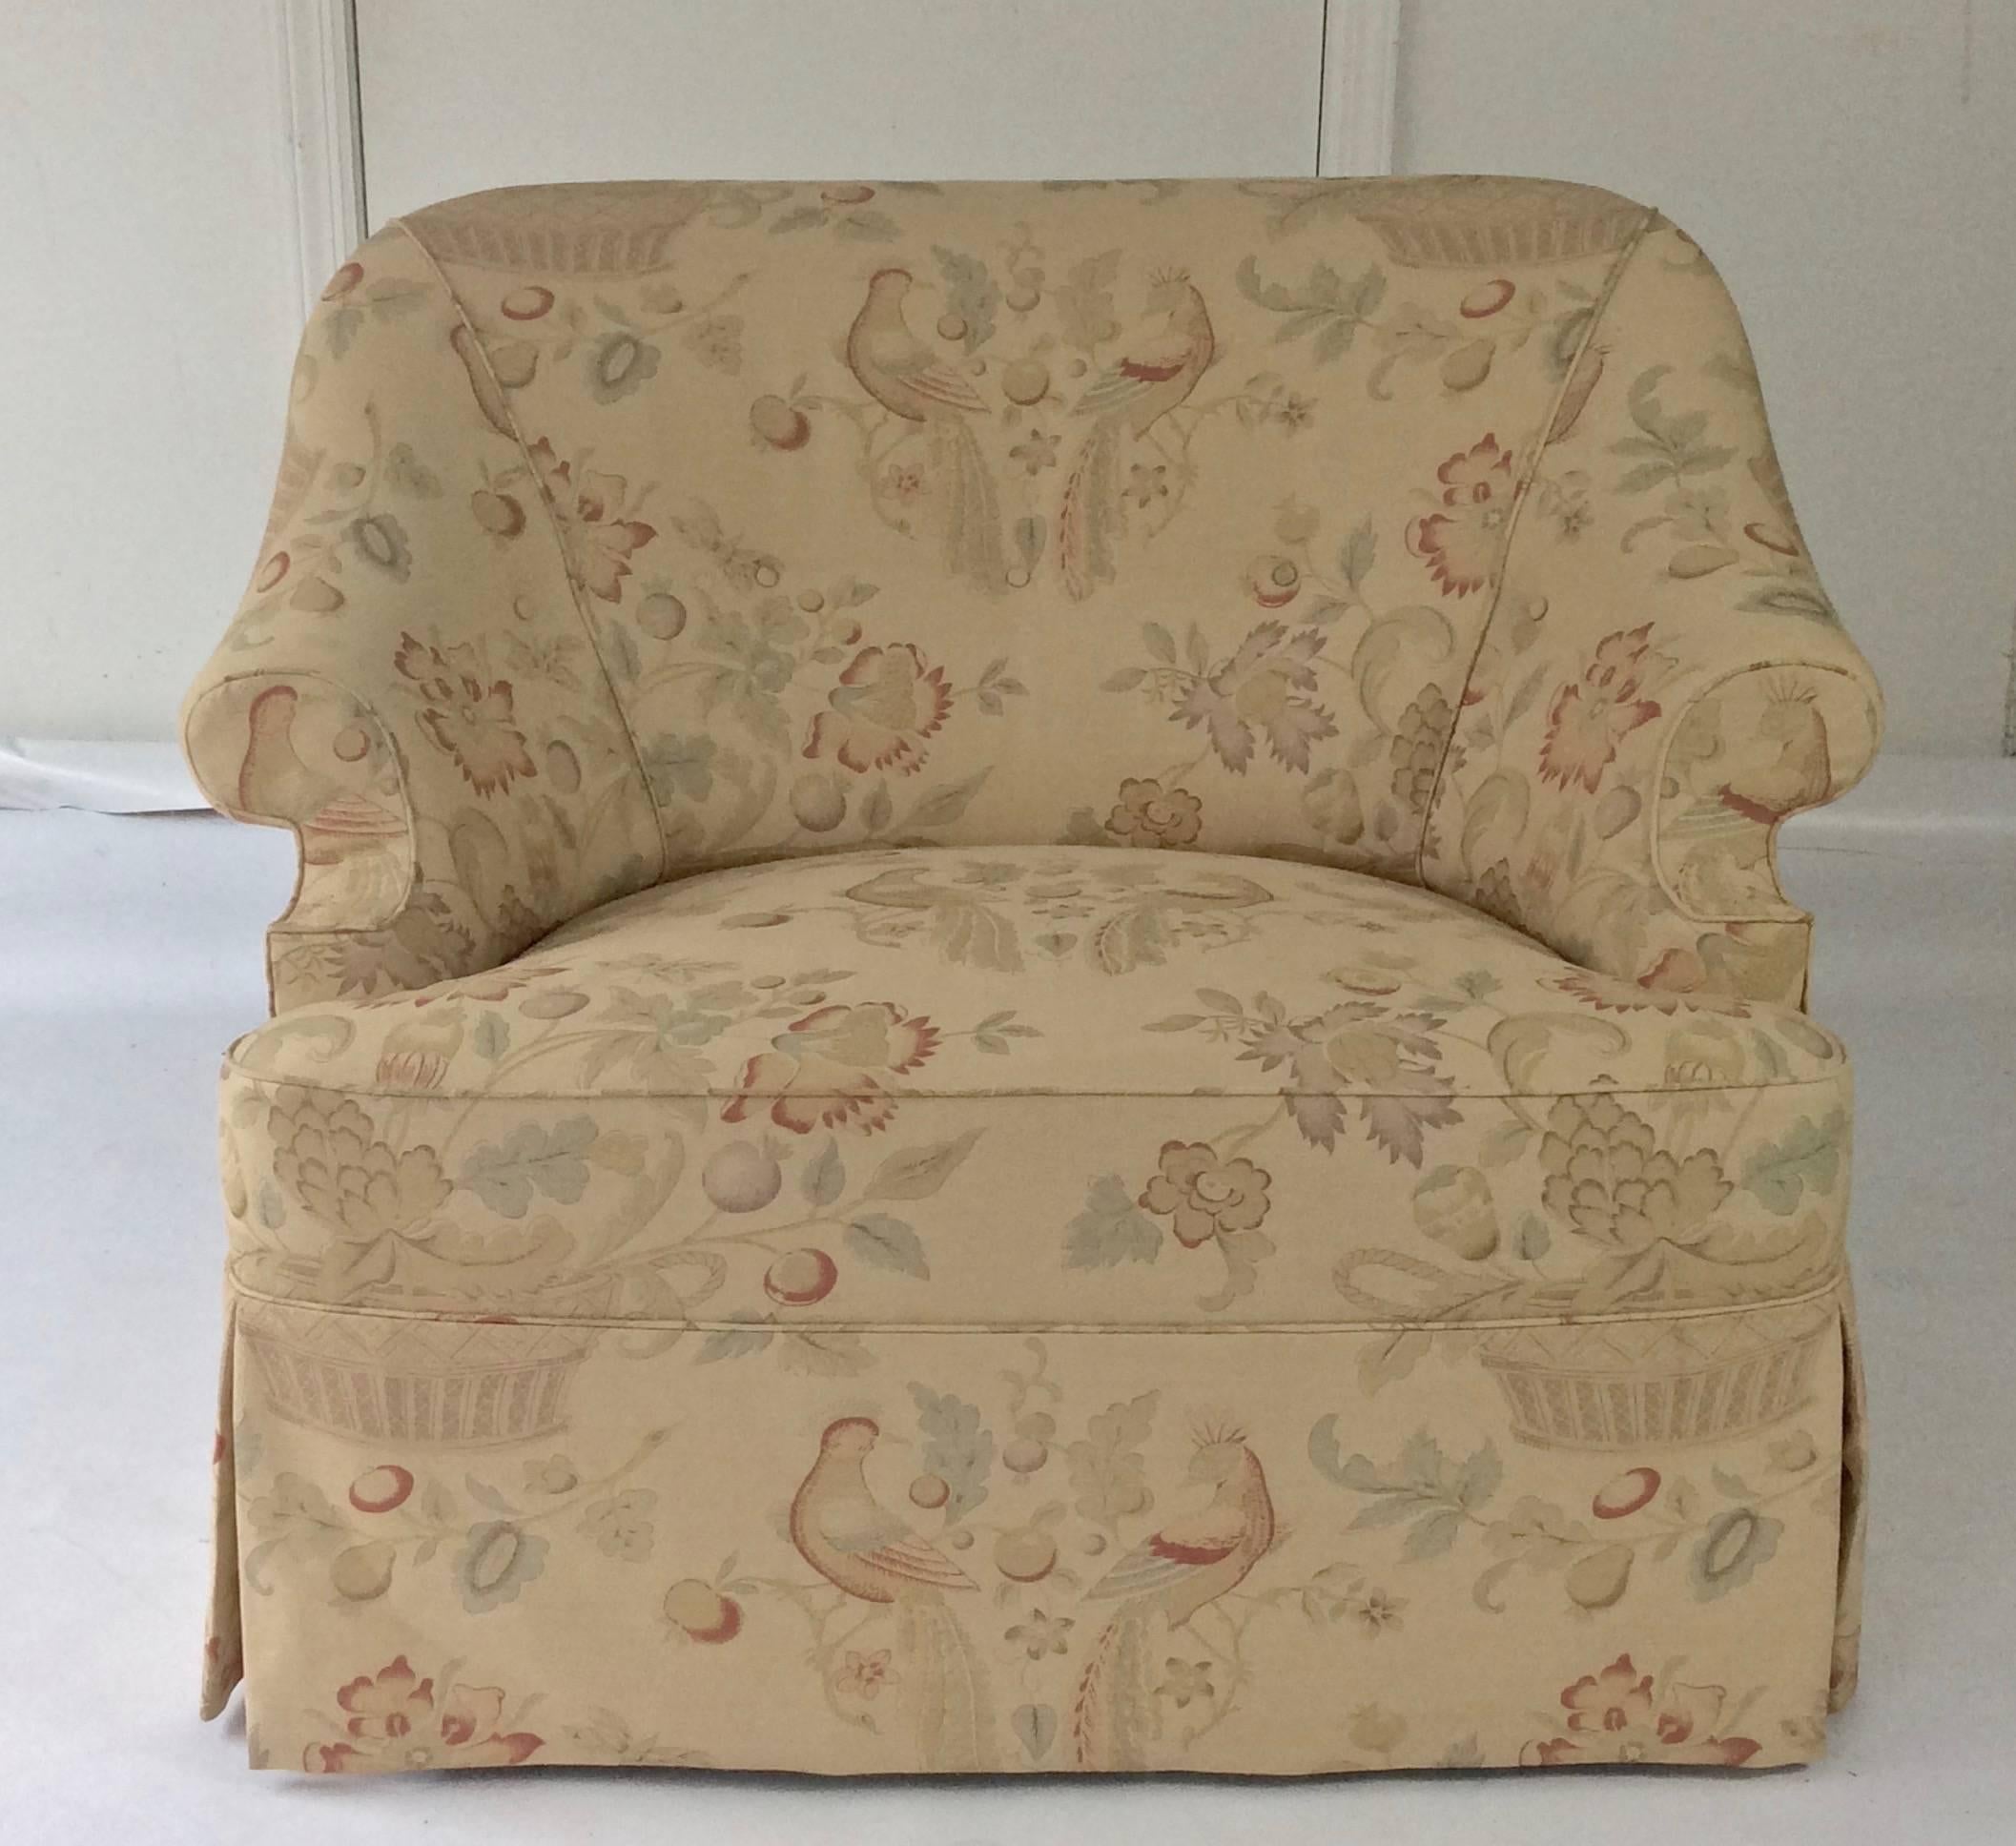 George Smith style custom English rolled arm sofa, three-seat, generous proportions, deep seated and extremely comfortable, with down cushion, button tufted back, and pleated dressmaker skirt. Custom upholstered, by master upholsterer in birds and